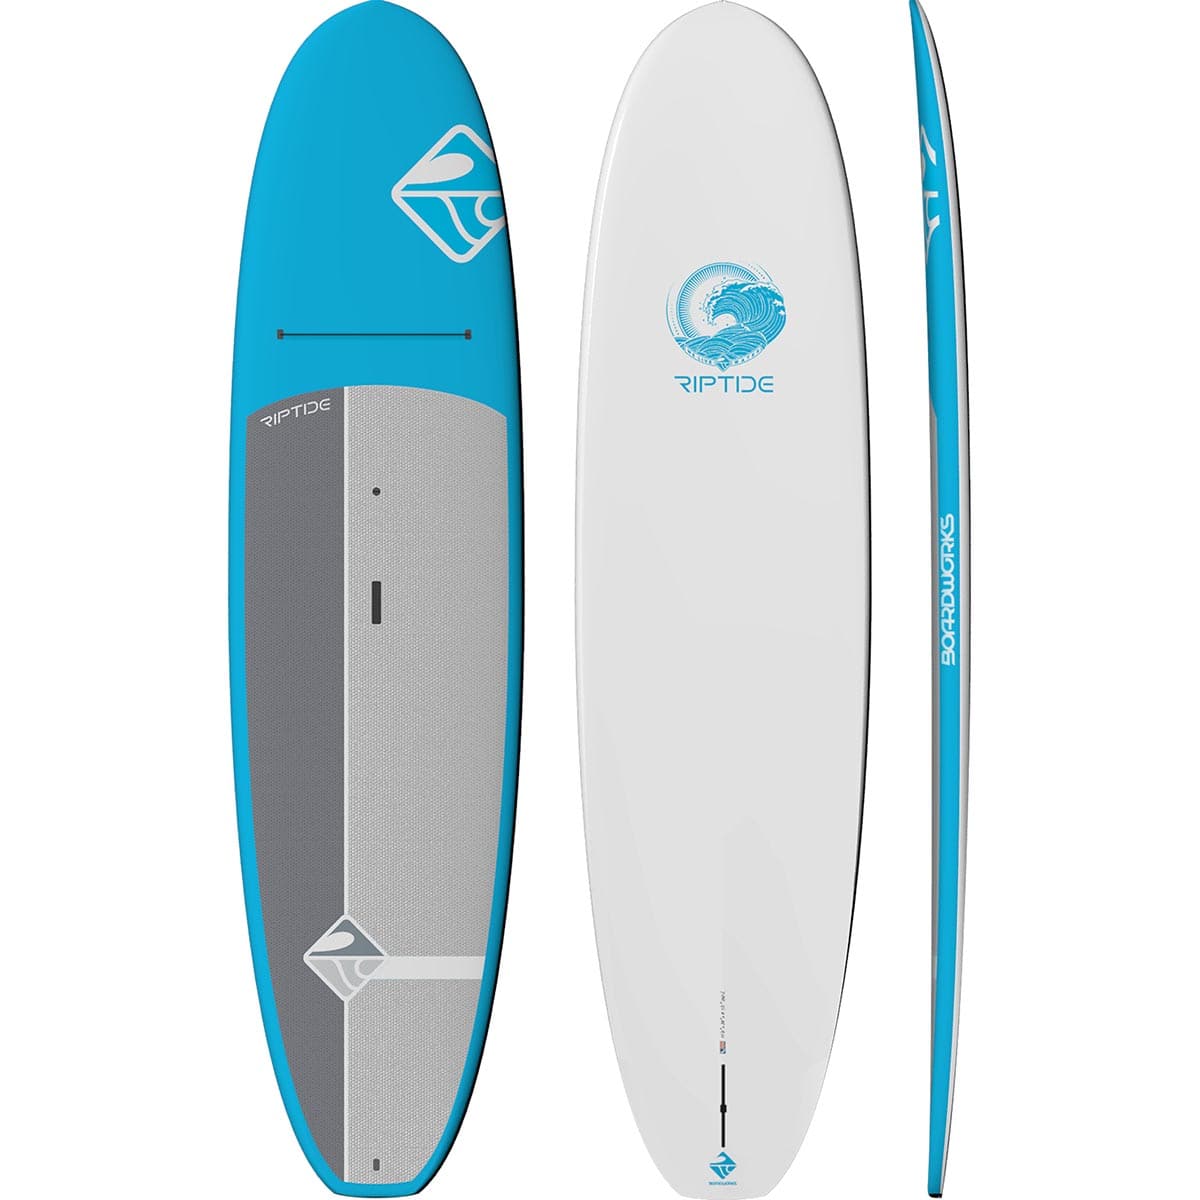 Featuring the Riptide 10'6 & 11'6 rigid sup manufactured by Boardworks shown here from a second angle.